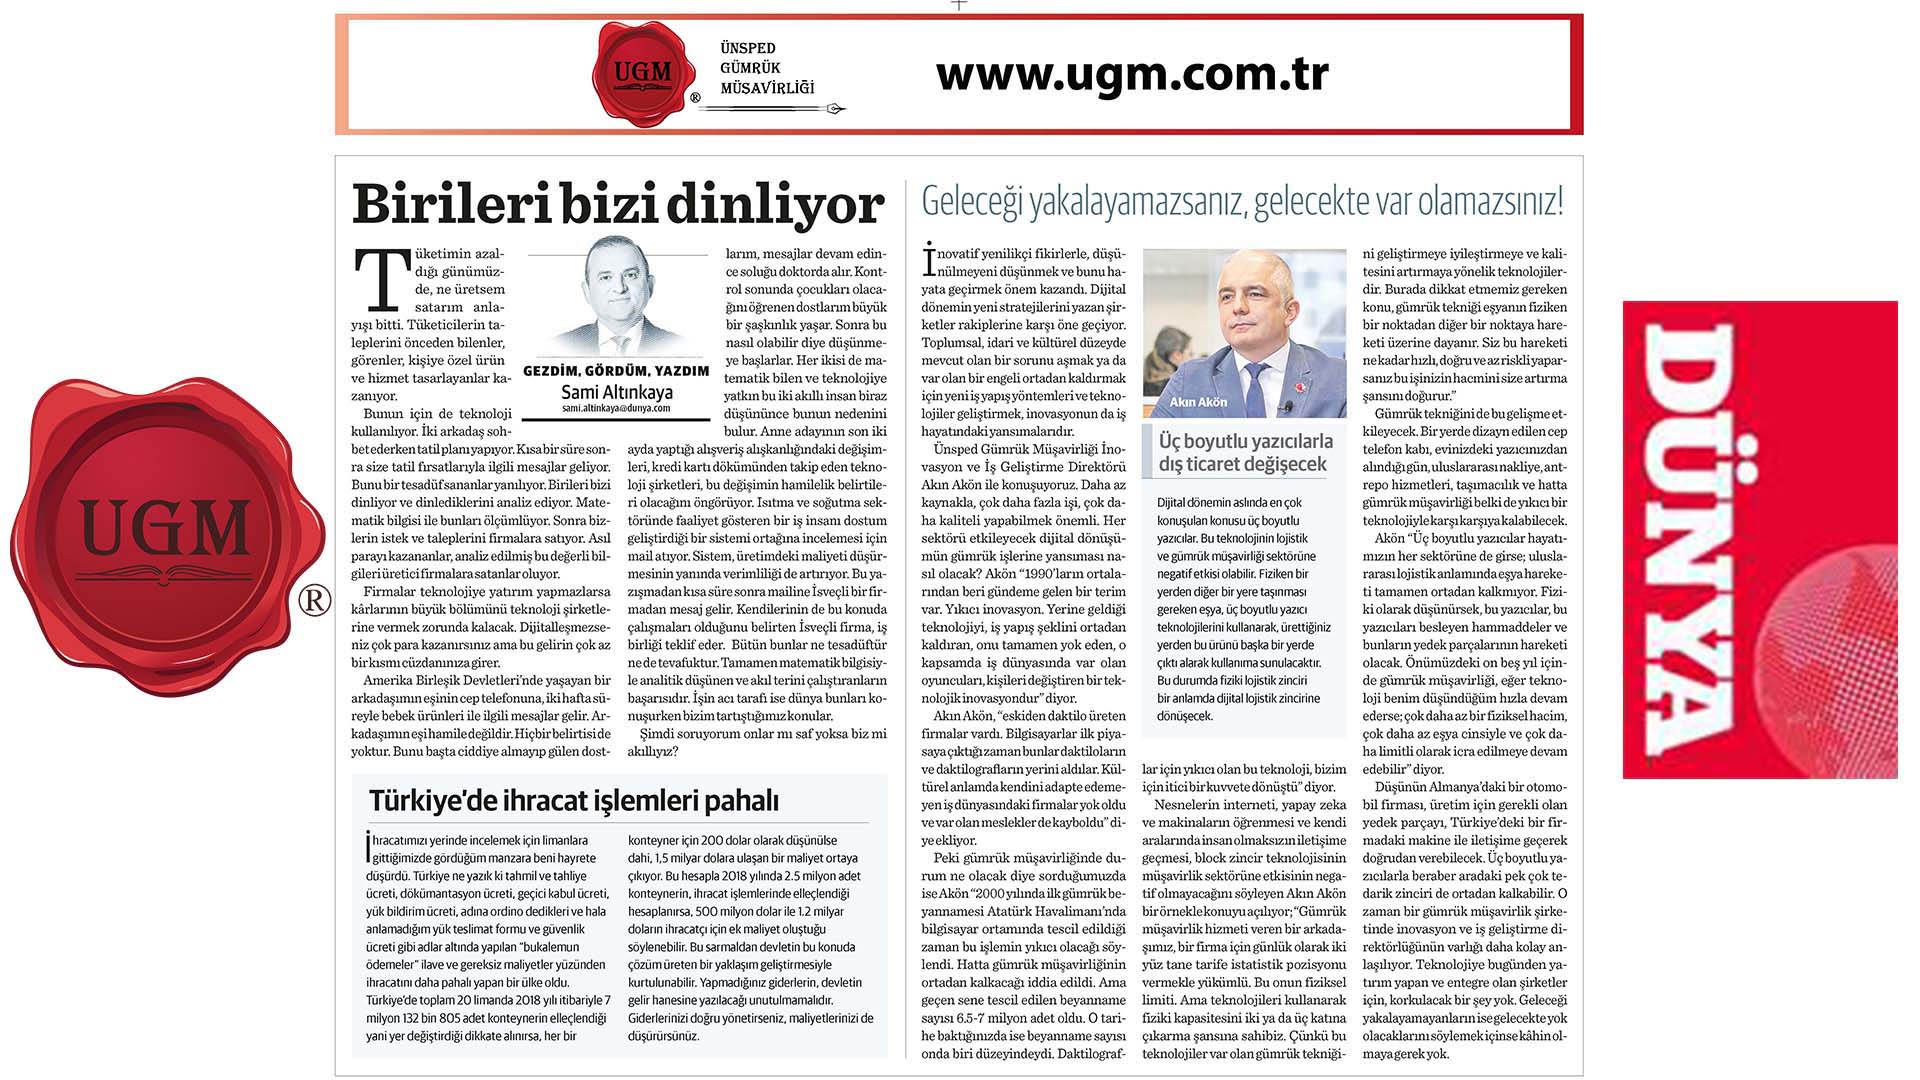 Our UGM Corporate Communications Director Mr. Sami ALTINKAYA's article titled "Someone Listens to Us" was published on 10.02.2020 in Dünya Newspaper.